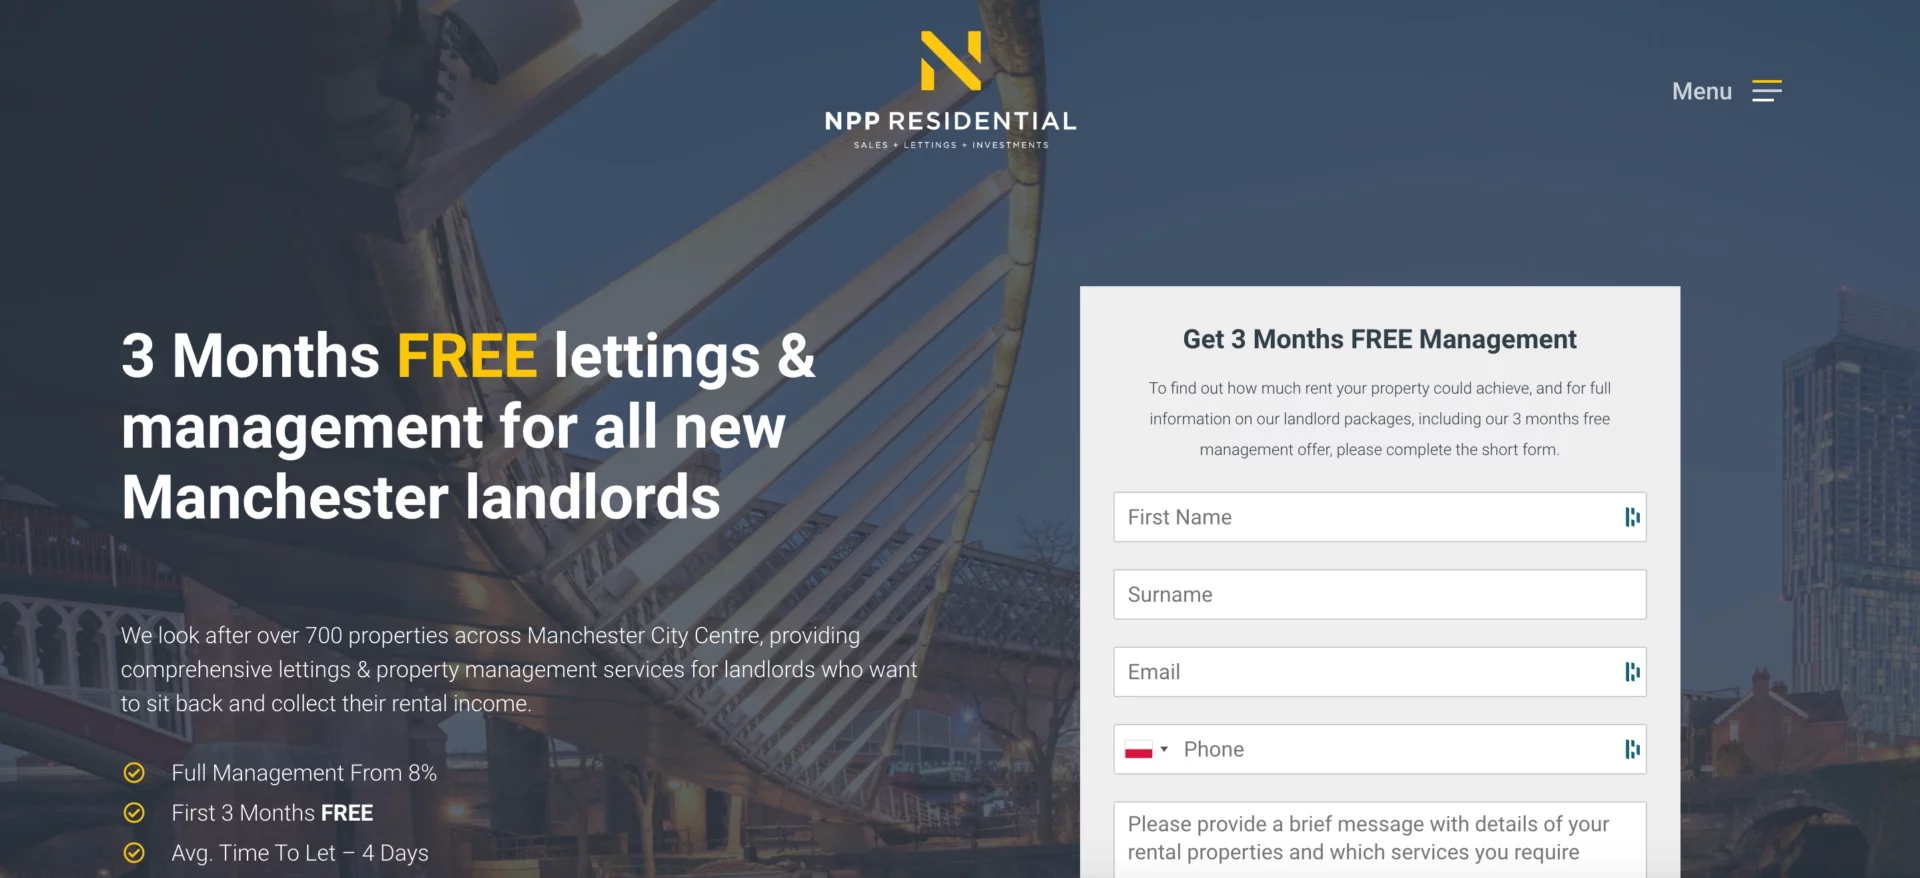 NPP Residential real estate landing page seduces potential clients with a free management offer